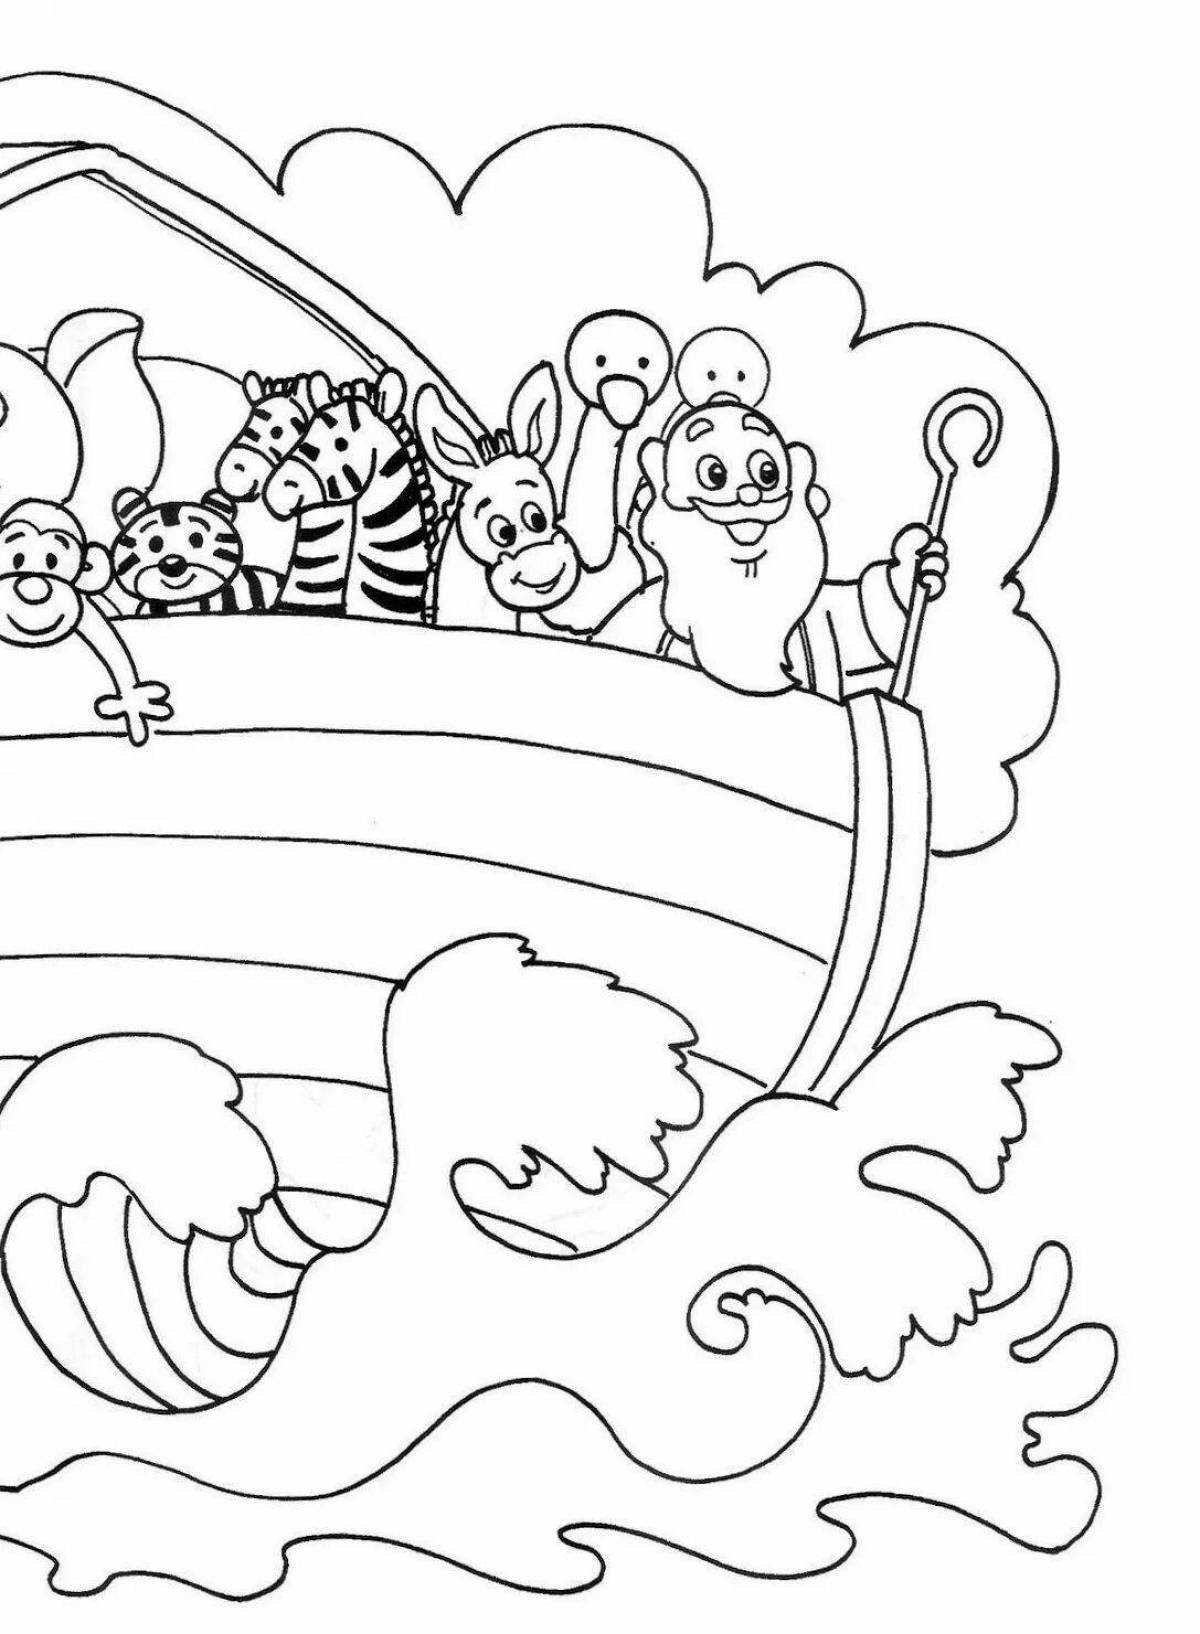 Colorful Noah's Ark coloring book for kids